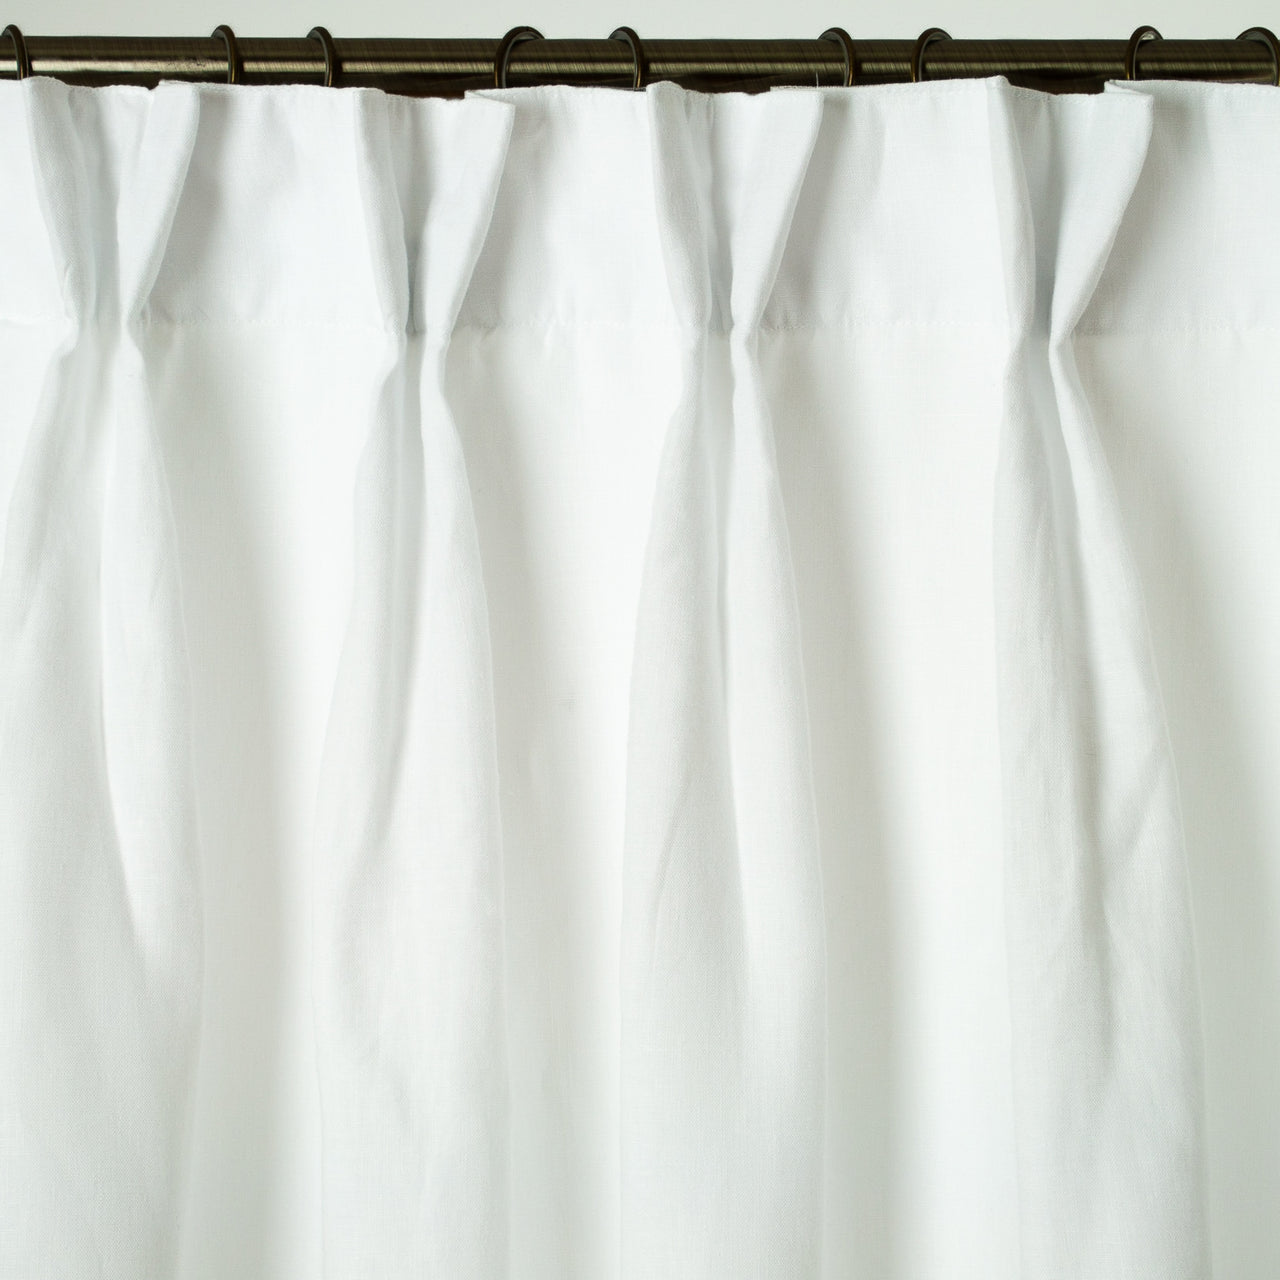 Dutch Pleat Linen Curtain Panel with Cotton or Blackout Lining - Heading for Rings and Hooks - Lined Linen Darkening Curtain